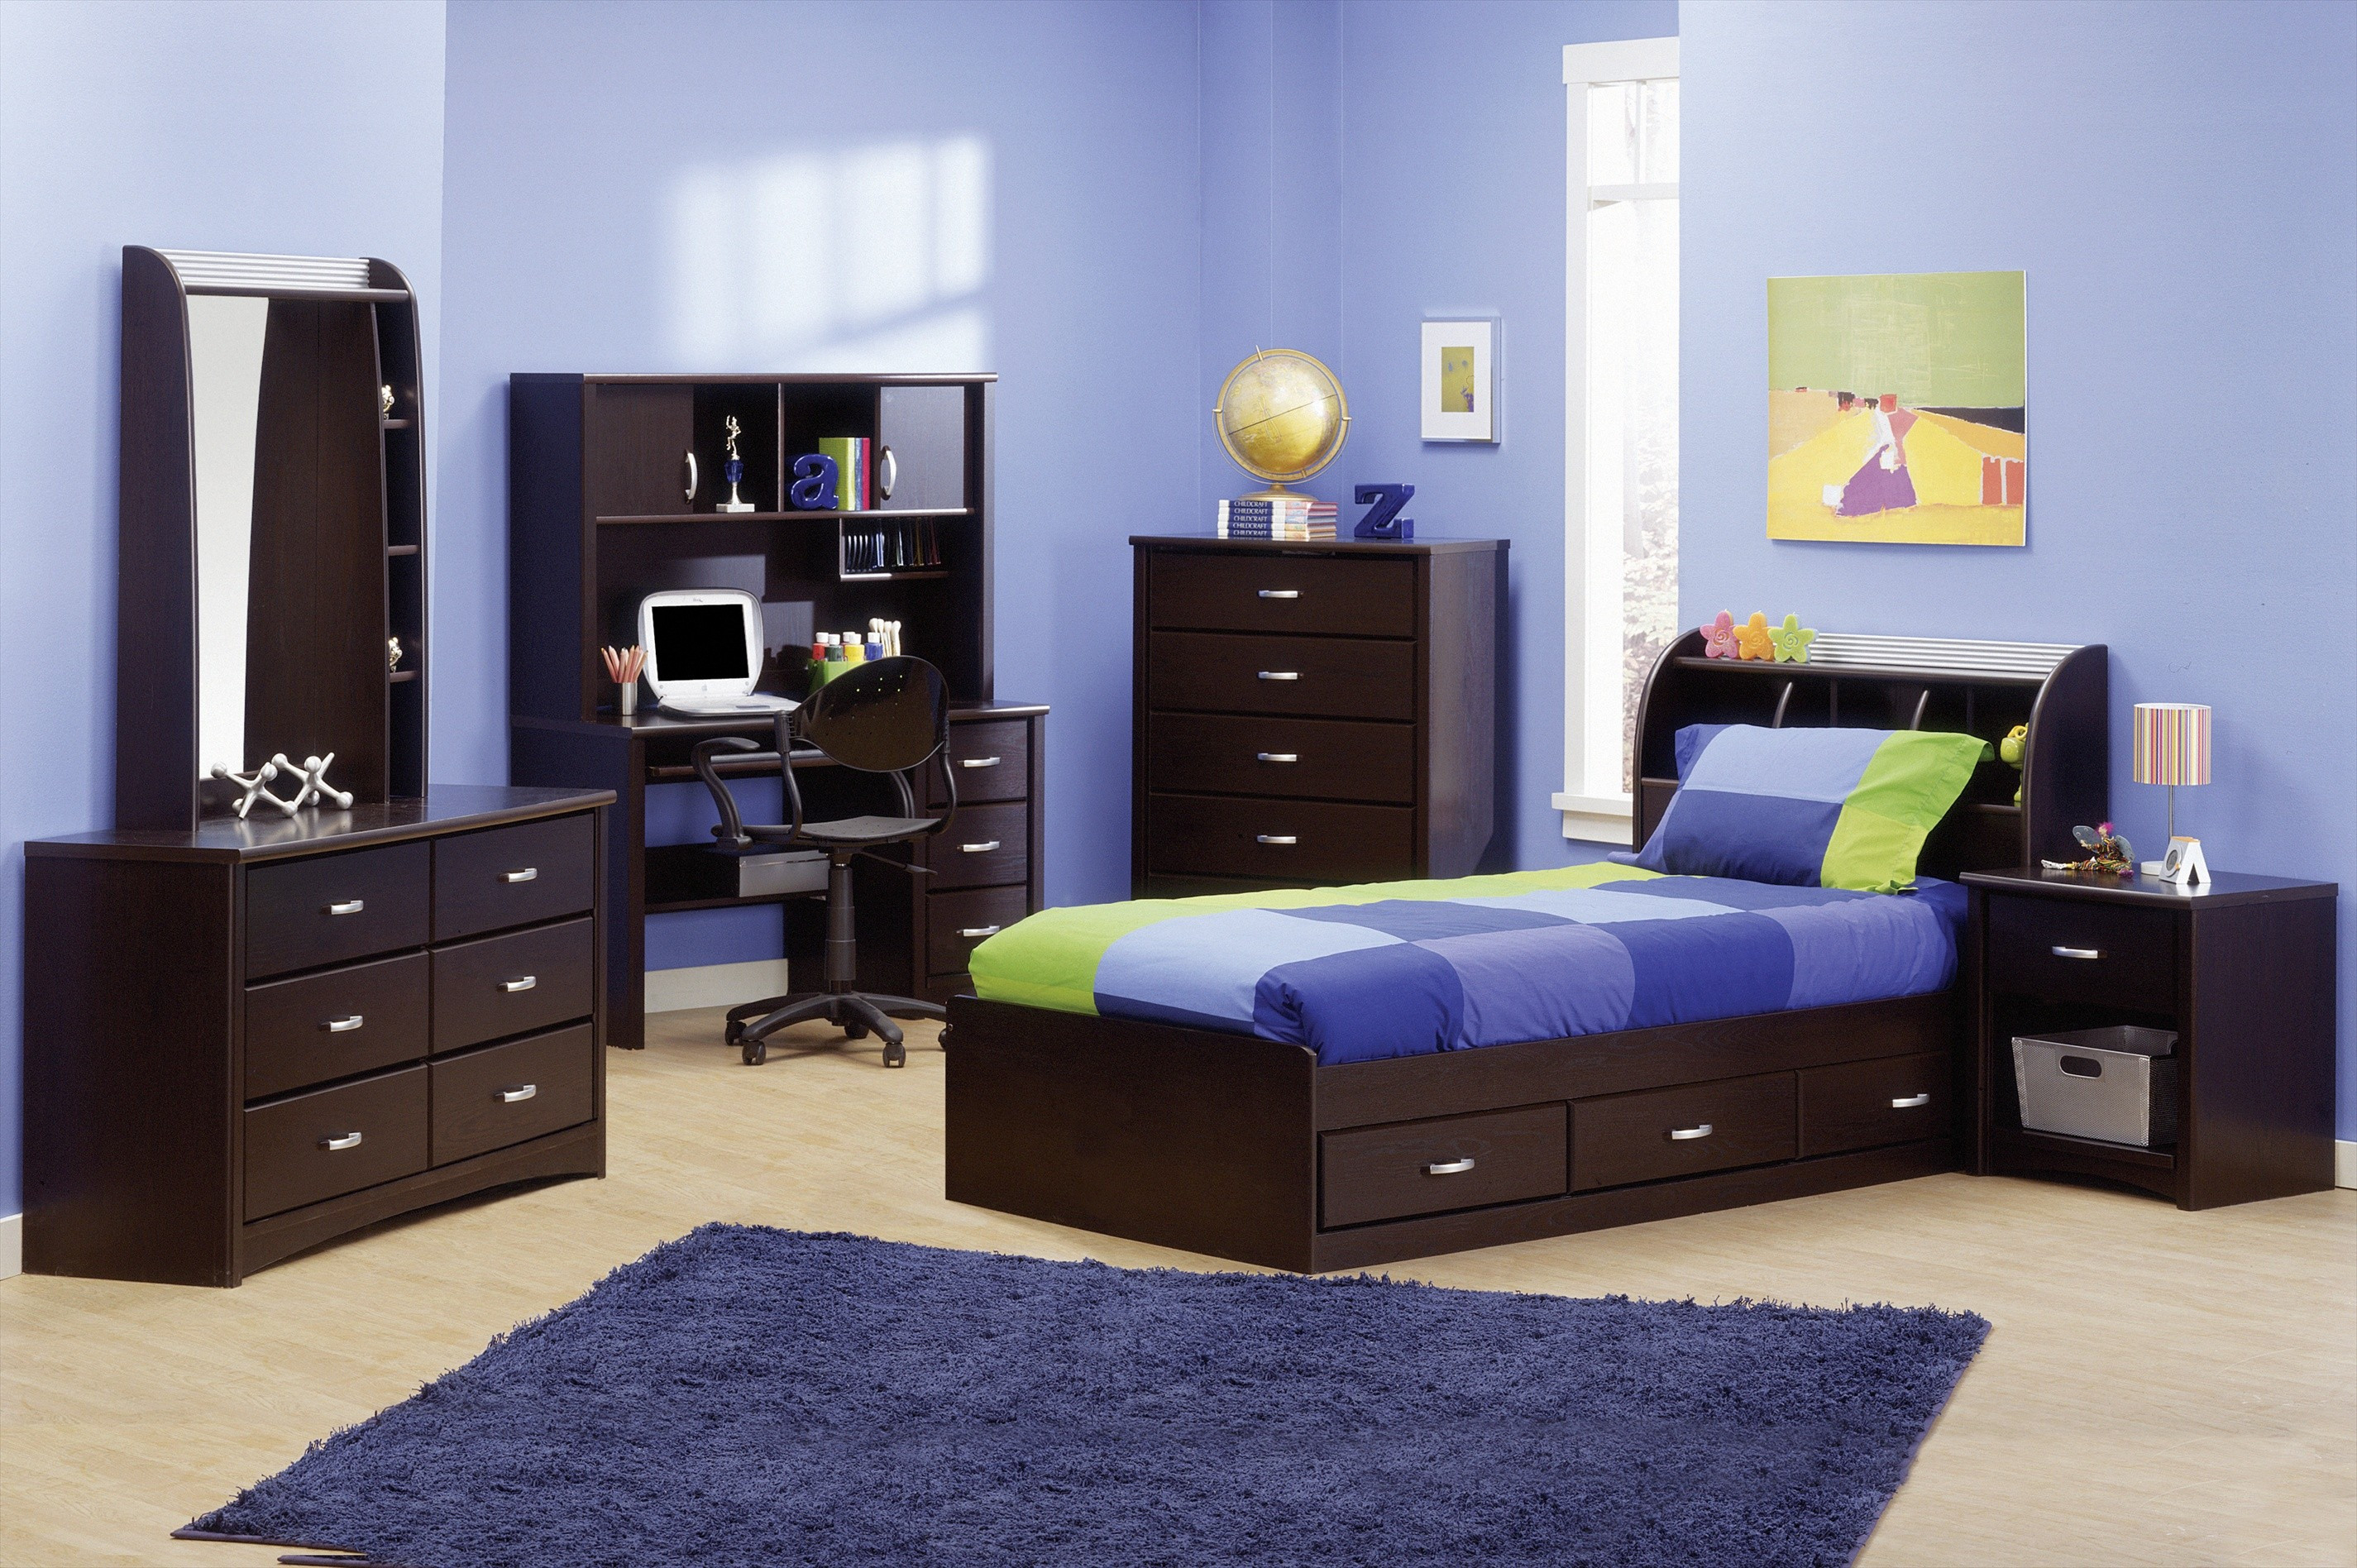 Bedroom Full Bedroom Set With Desk Value City Youth Bedroom Sets within size 2850 X 1896